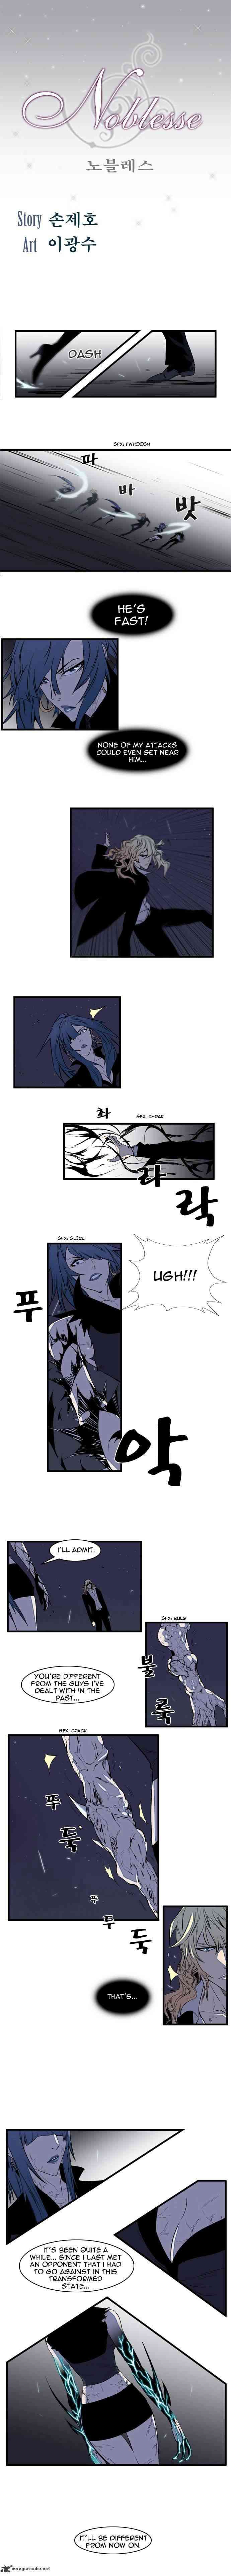 Noblesse Chapter 76 _ Chapters 76-90 page 1